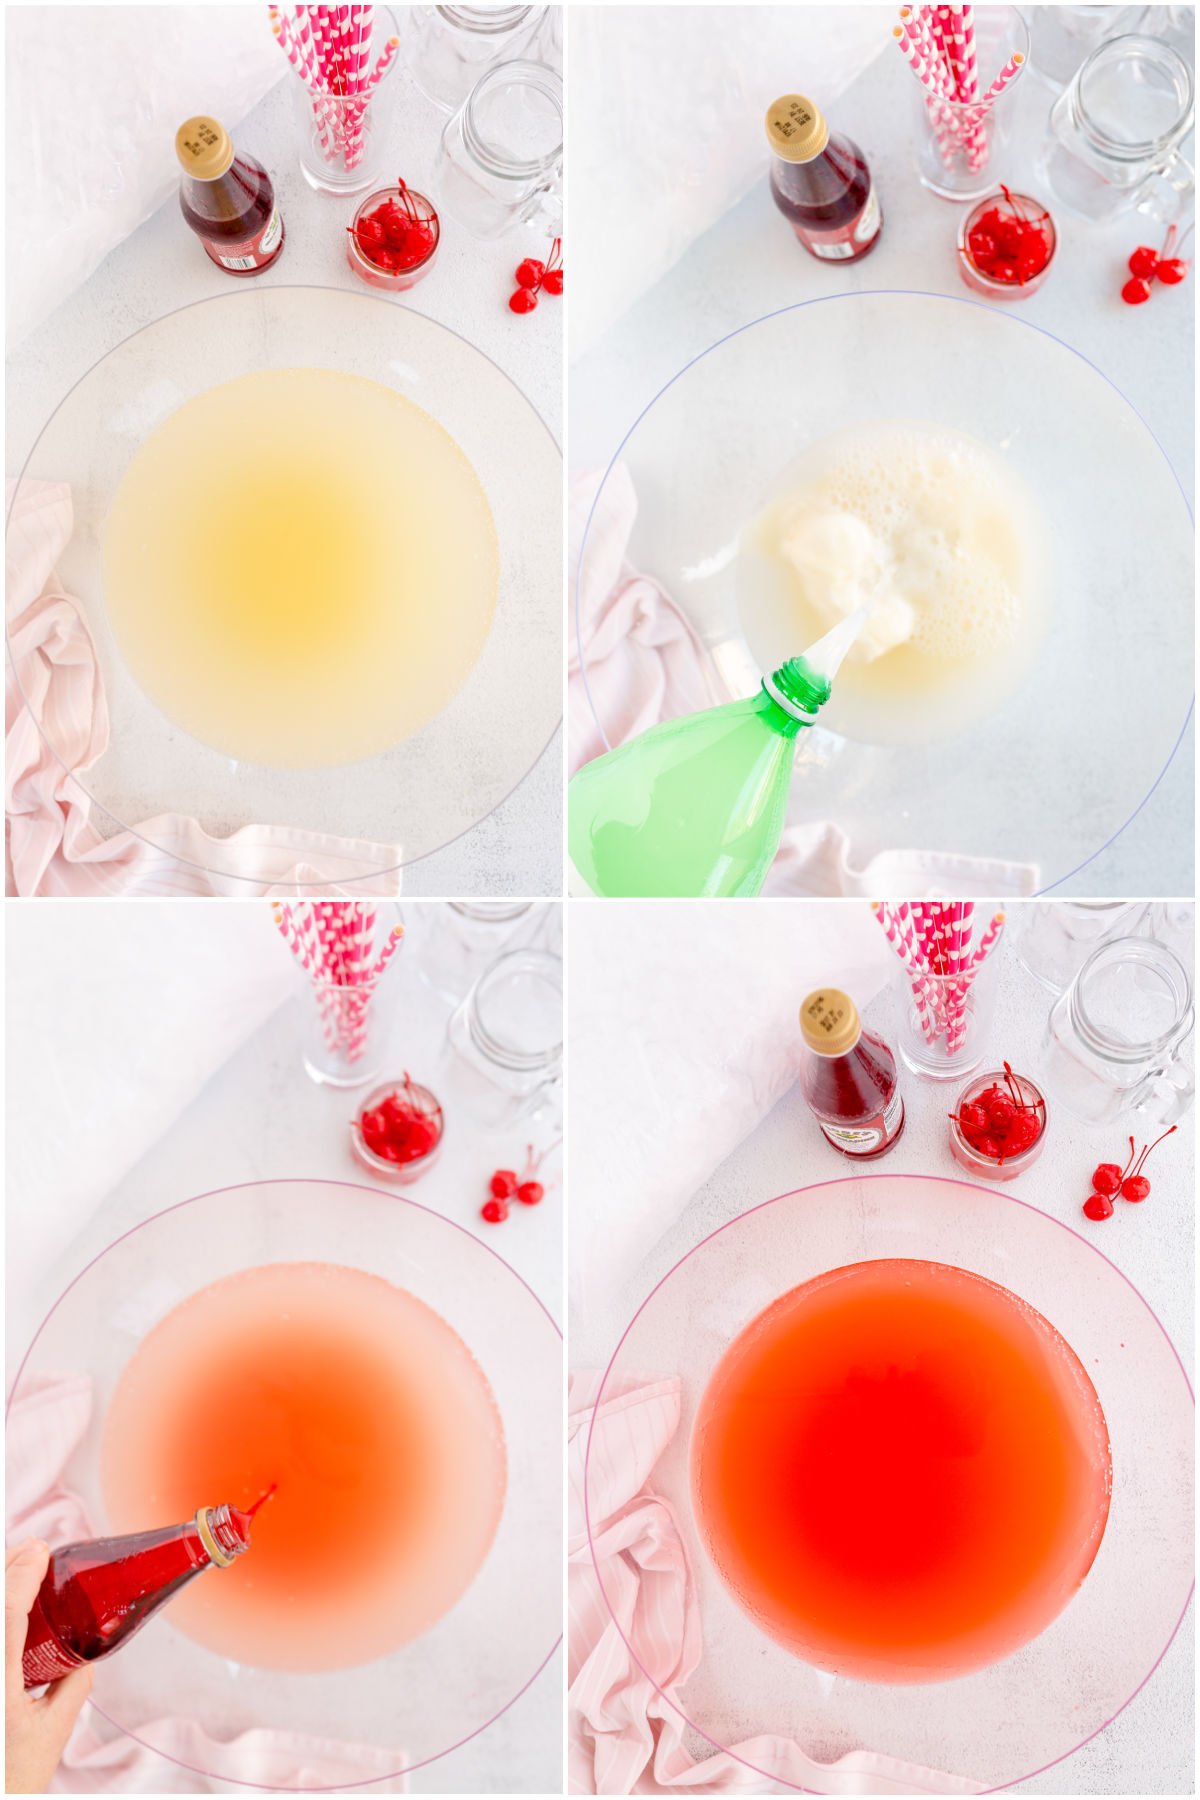 four process shots showing how to make pink punch